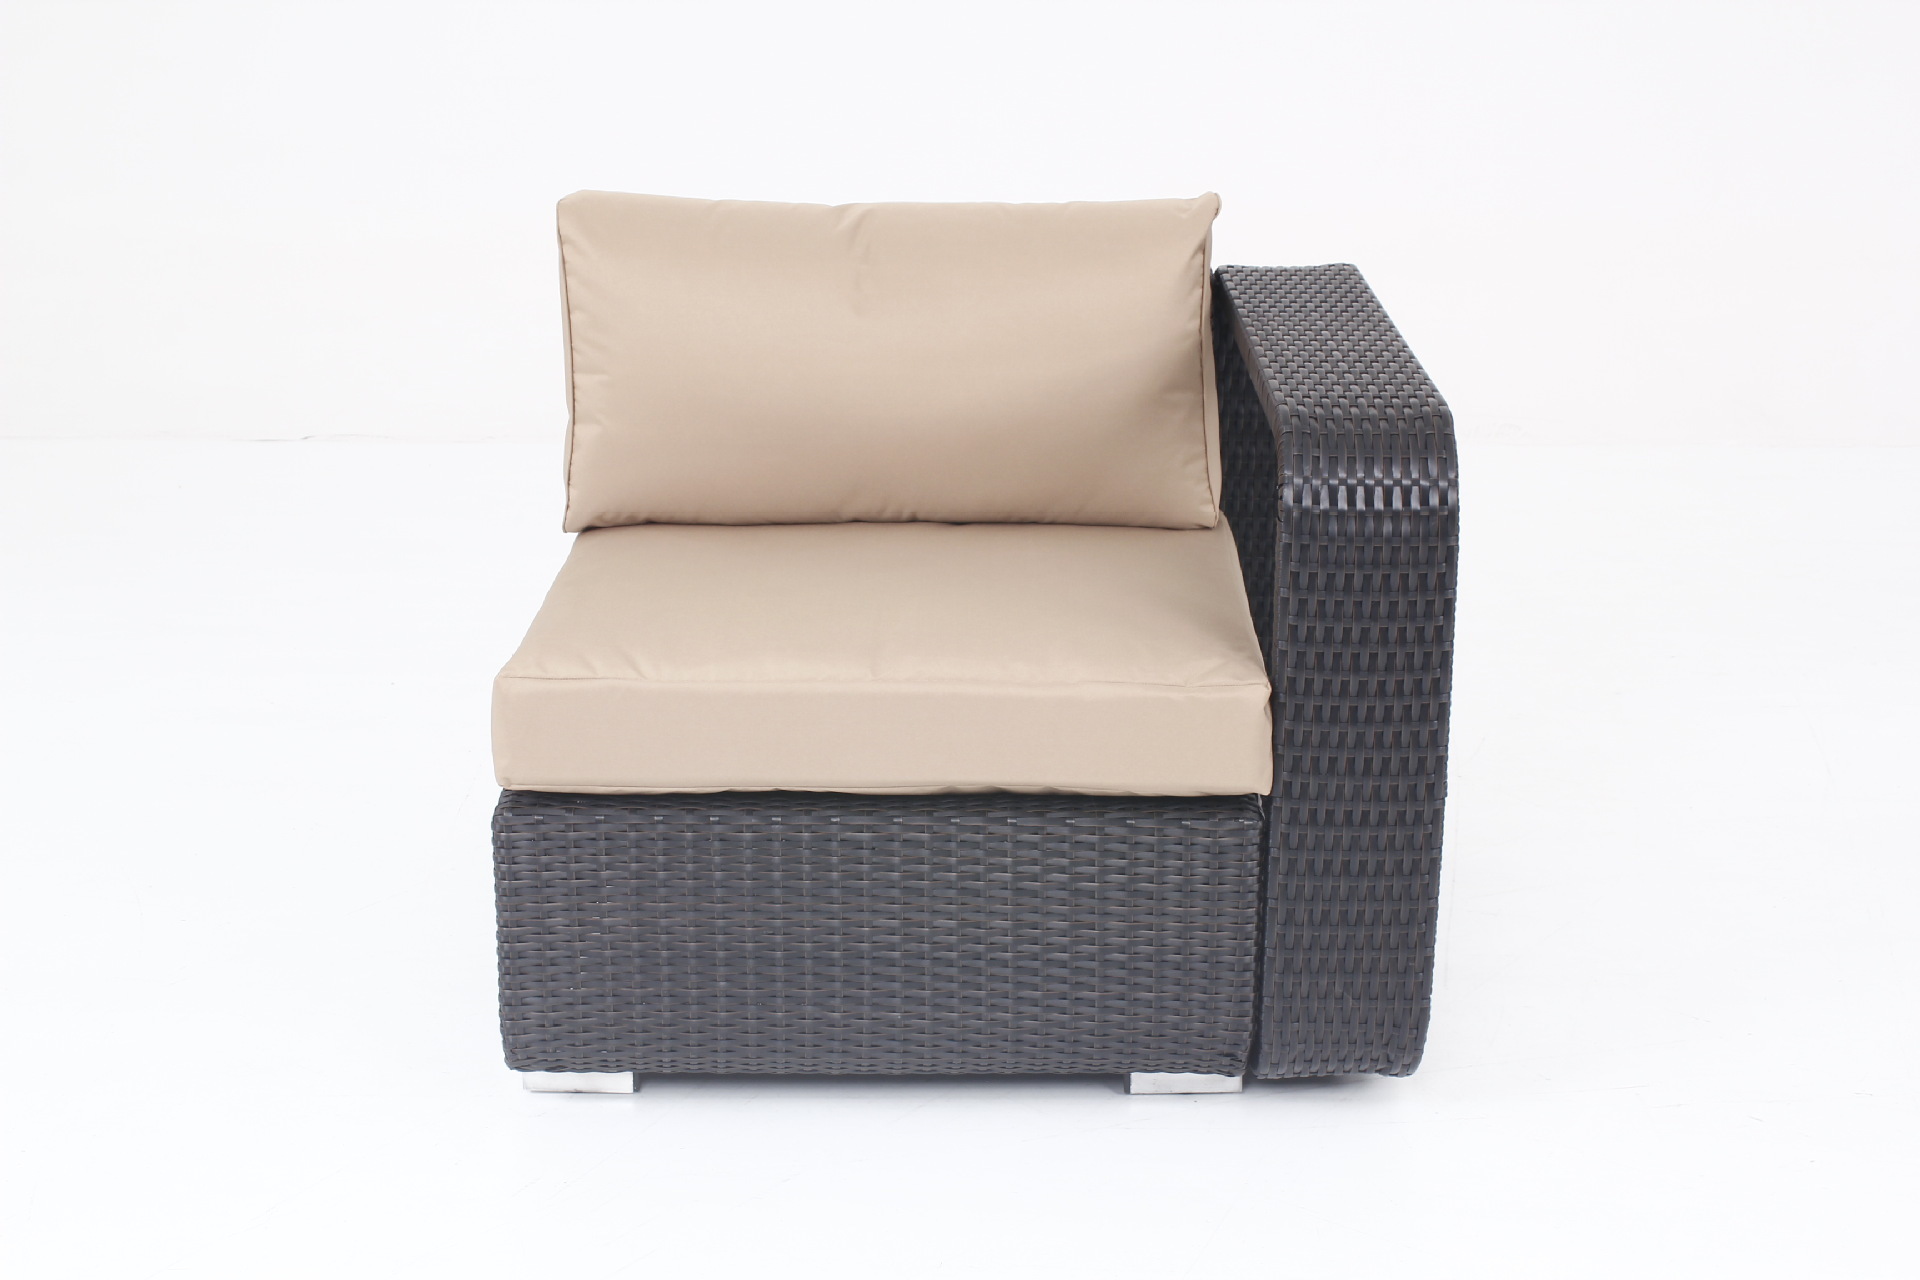 Outdoor Woven Rattan Table and Chairs Sofa Patio Wicker Furniture with High-quality Cushions